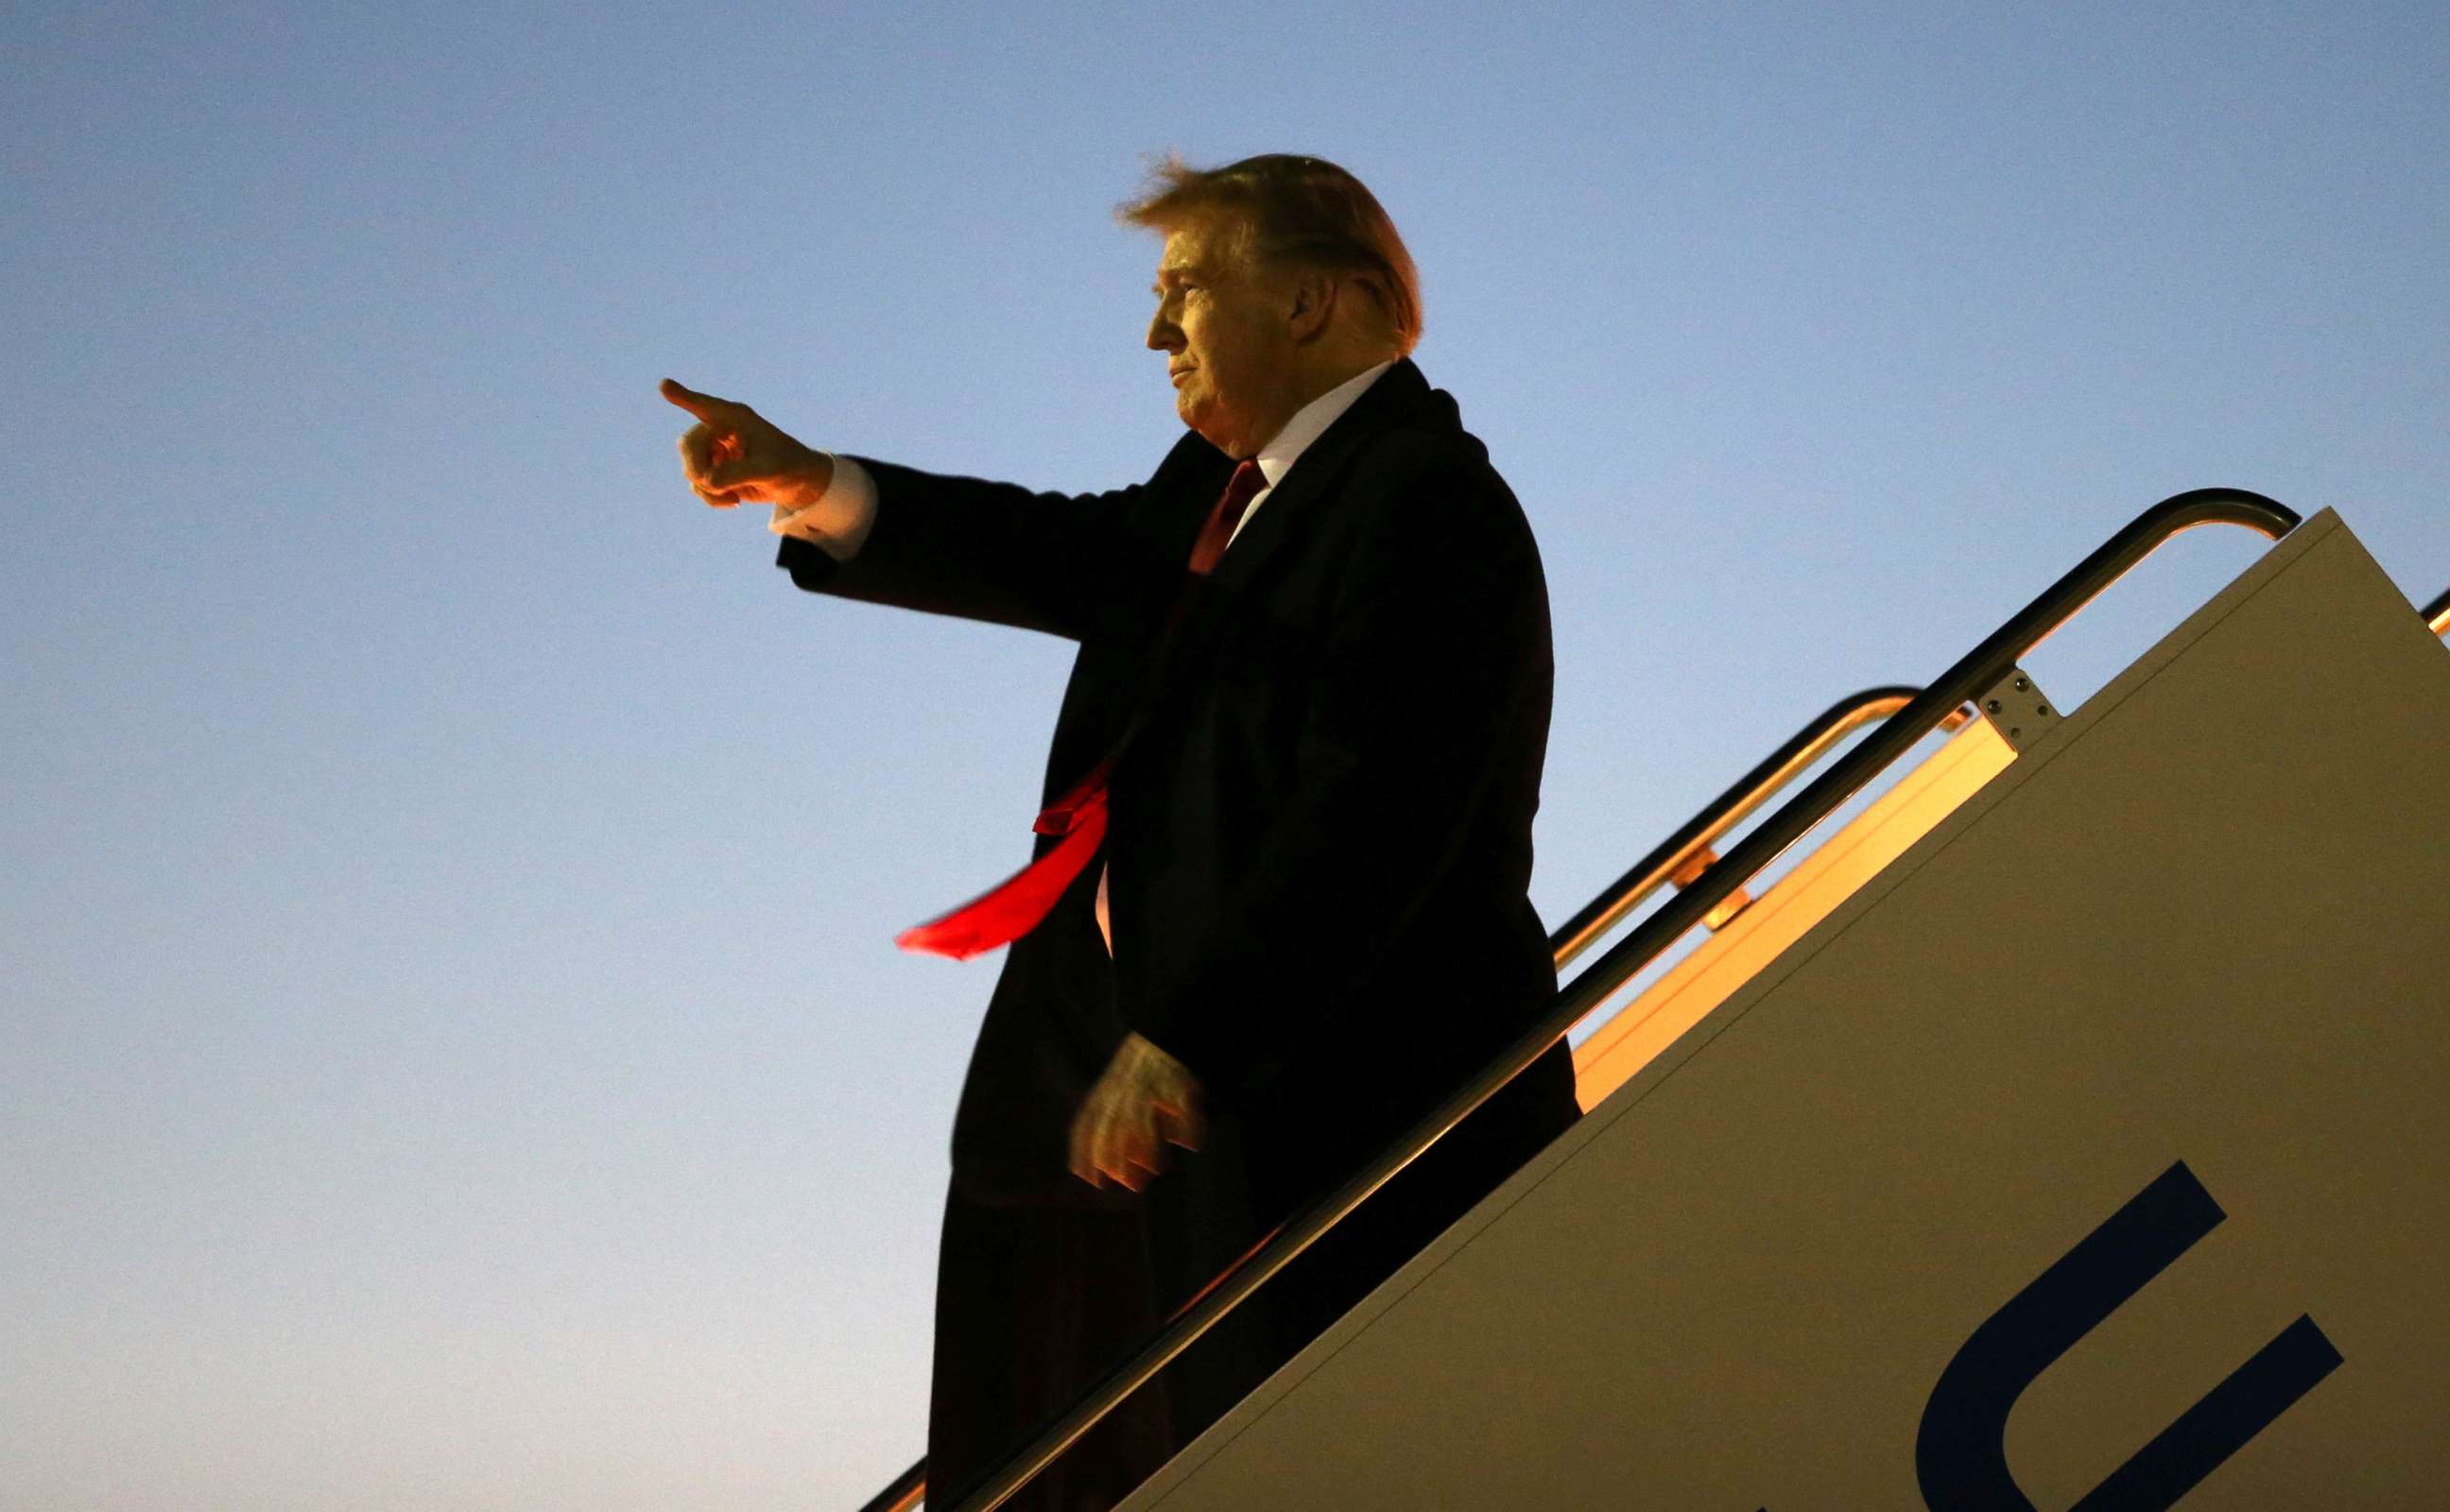 PHOTO: President Donald Trump greets supporters as he disembarks Air Force One after landing at El Paso International Airport in El Paso, Texas, Feb. 11, 2019.